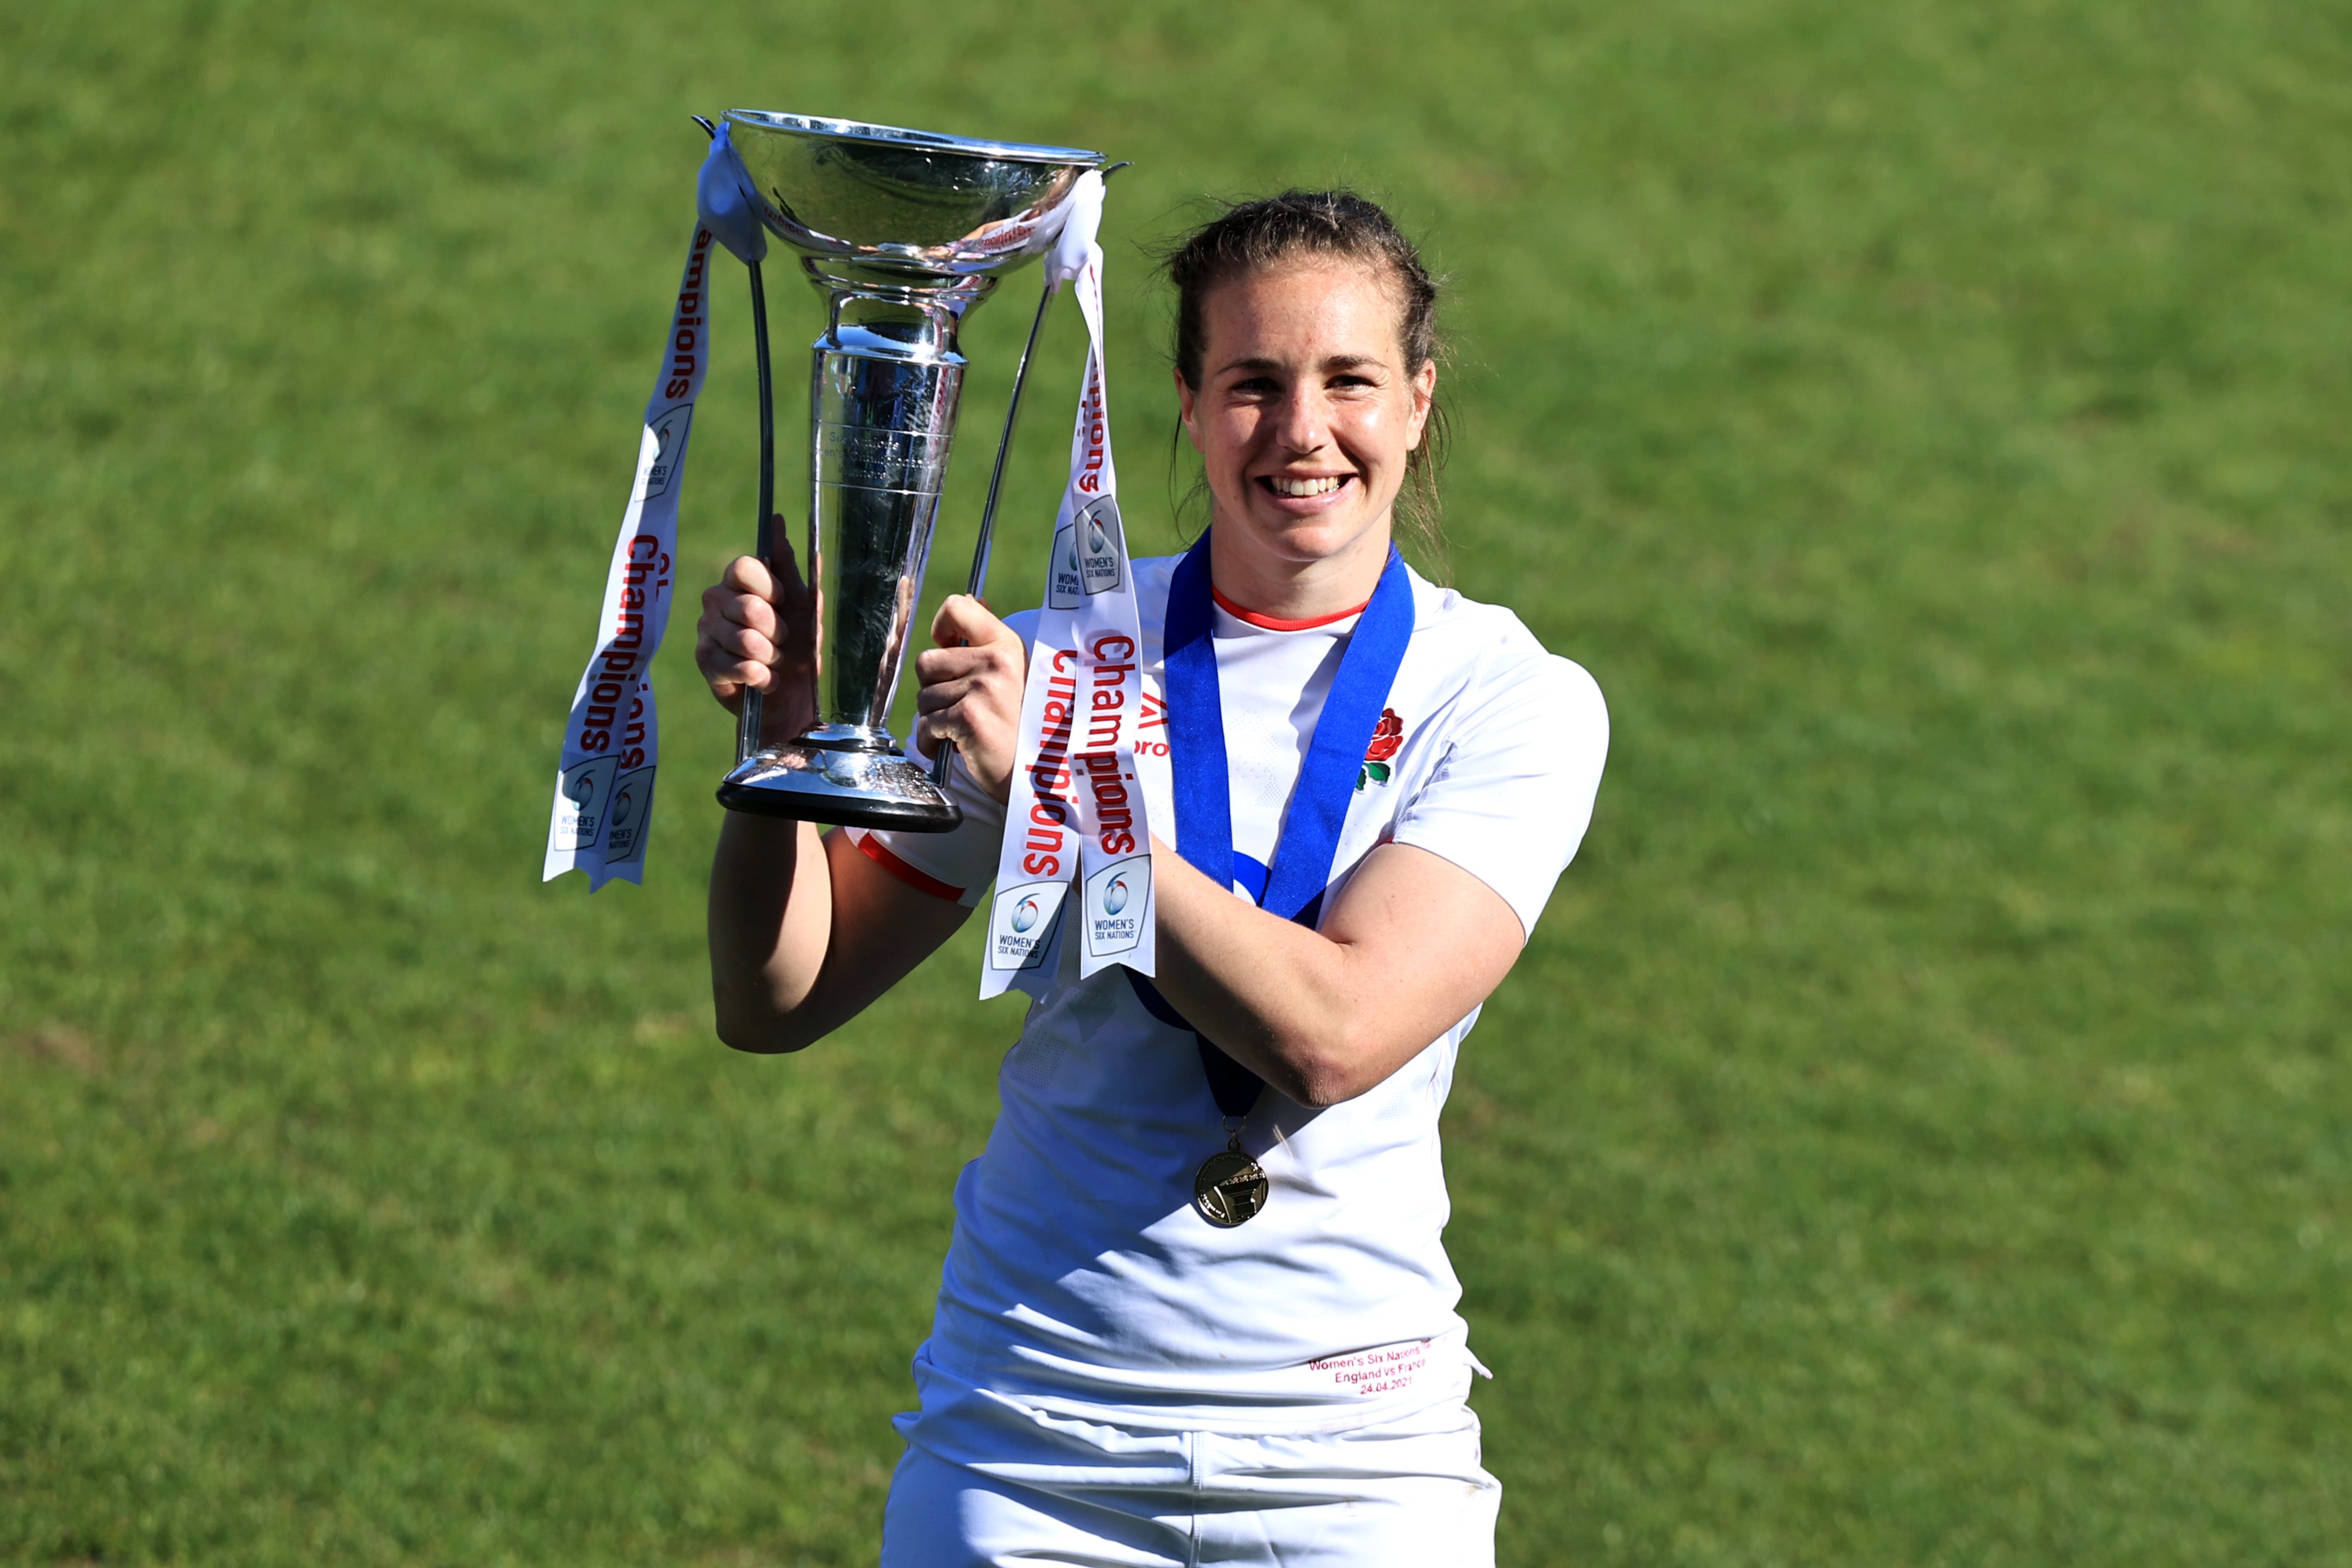 Emily Scarratt has returned to the England squad after missing the autumn internationals with injury